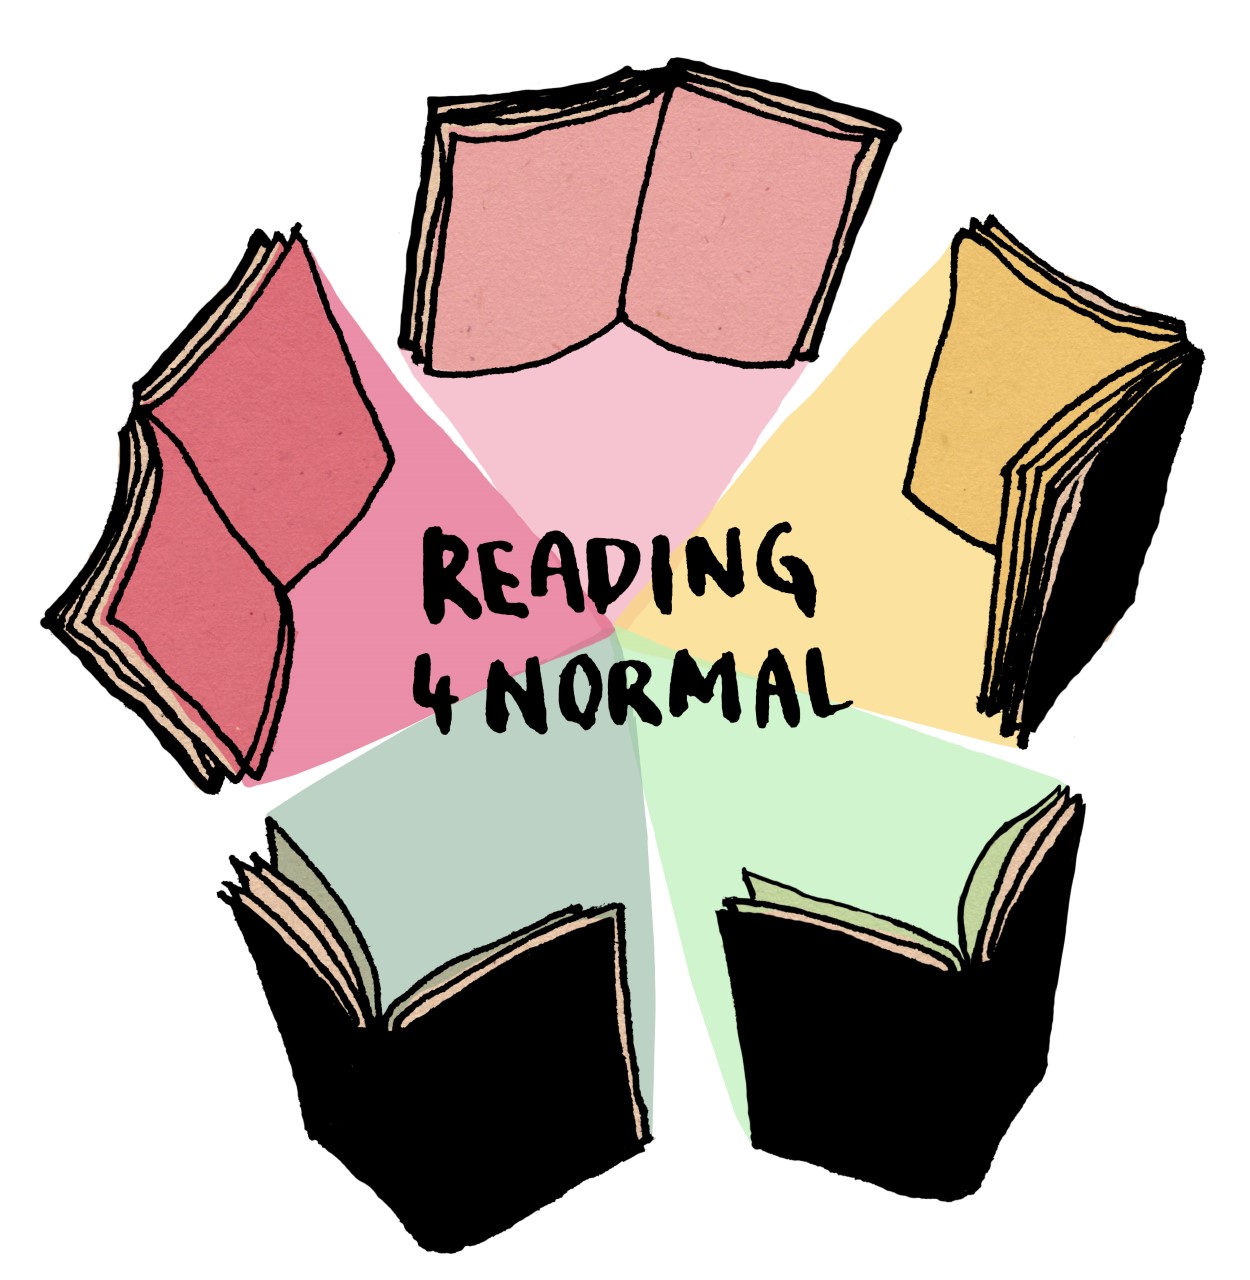 line drawing of chairs in circle with text 'Reading 4 normal'